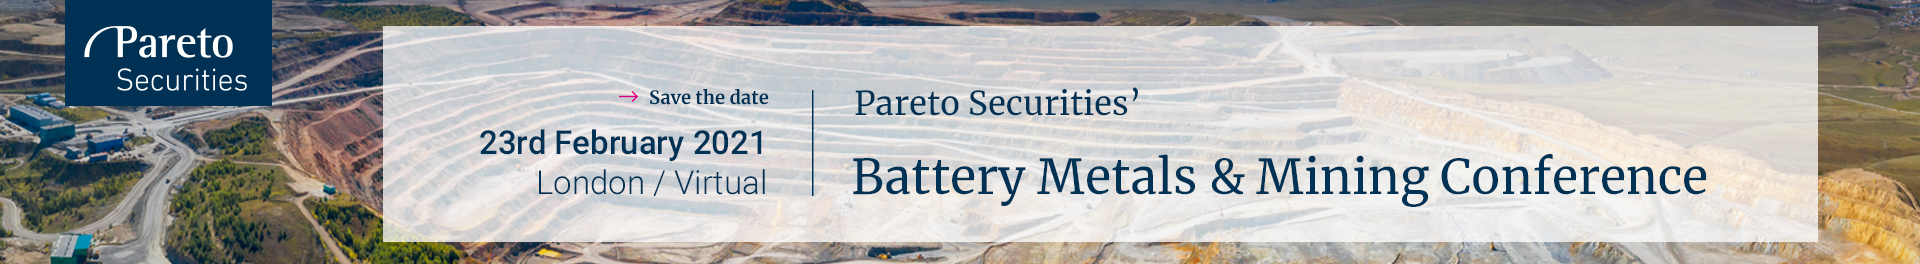 Header image for Pareto Securities’ Battery Metals & Mining Conference Event